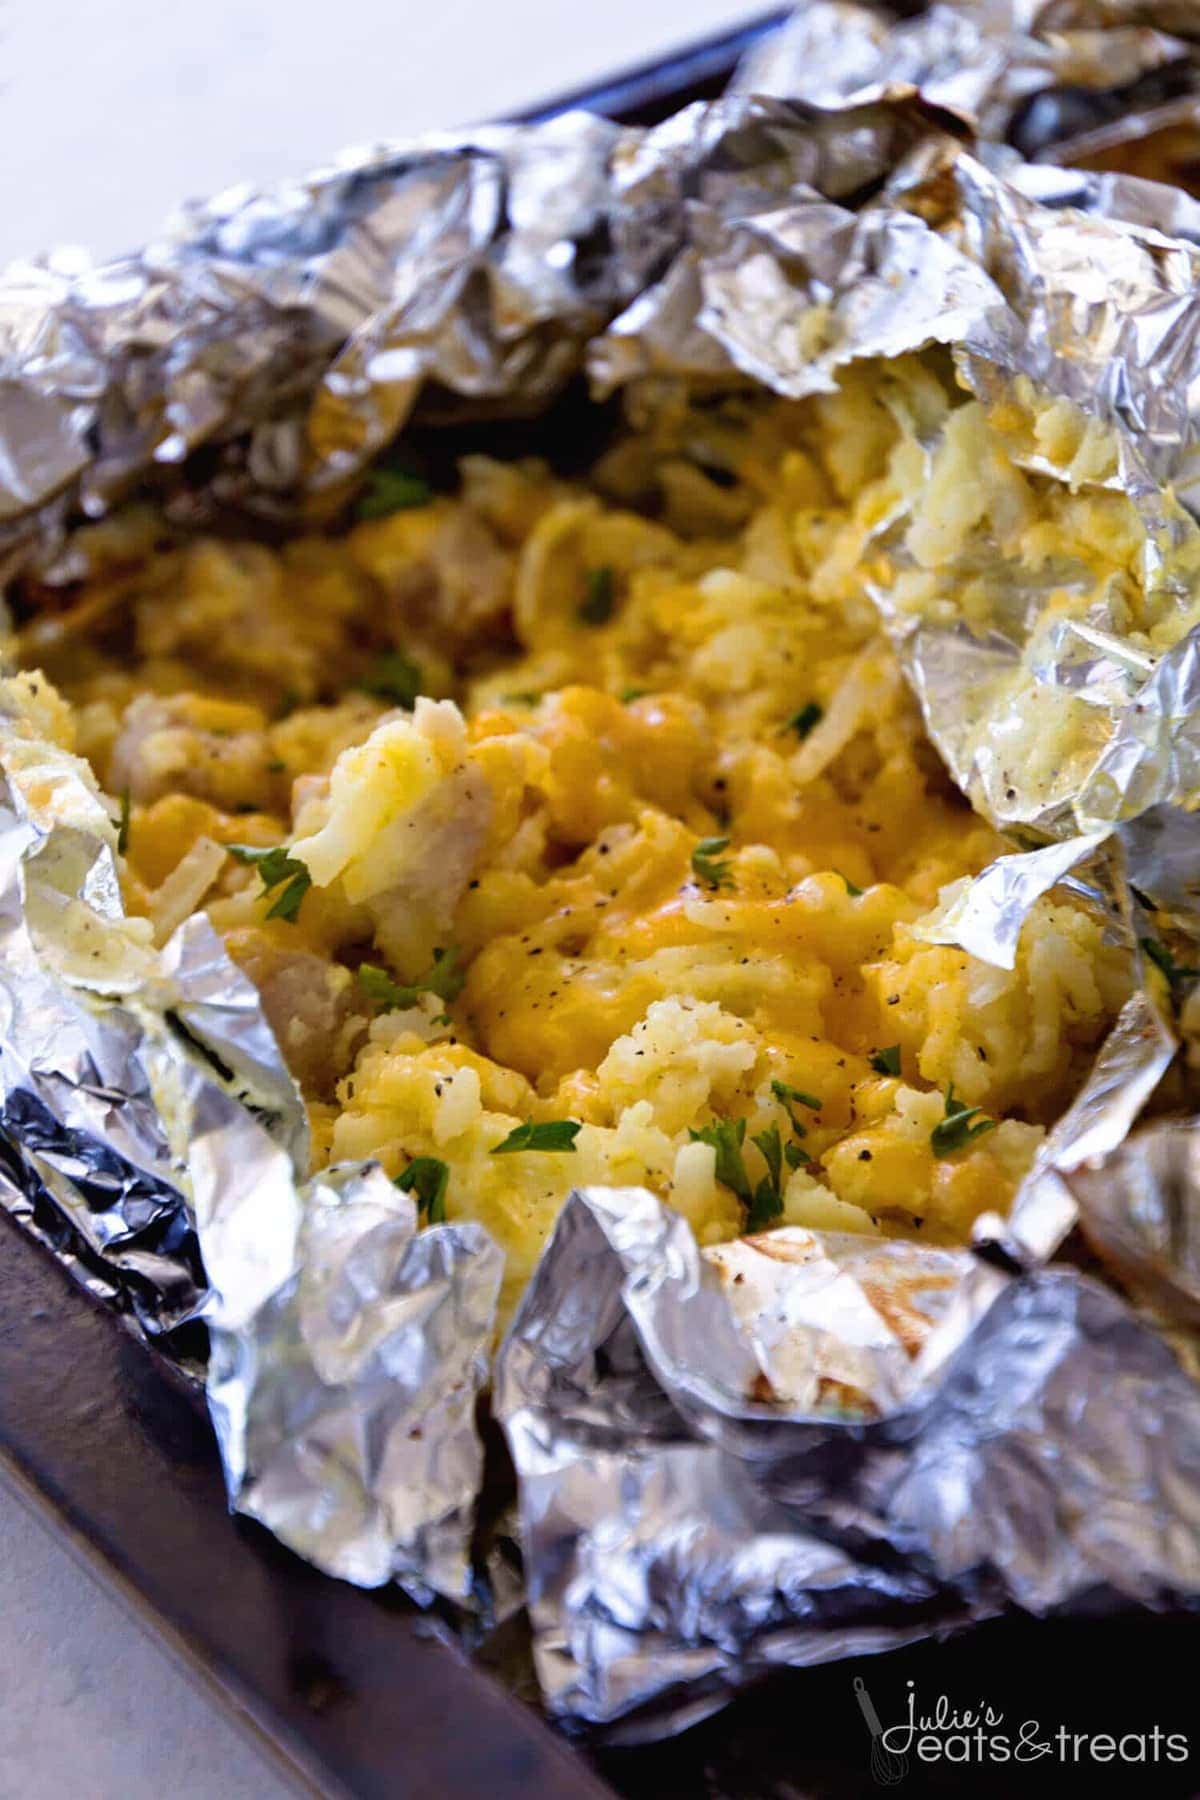 Egg Bake Breakfast Foil Packet ~ Love Breakfast Casseroles As Much As I Do? Now You Can Make Them Over The Campfire or on the Grill! Enjoy Your Favorite Breakfast on the Grill or Campfire!